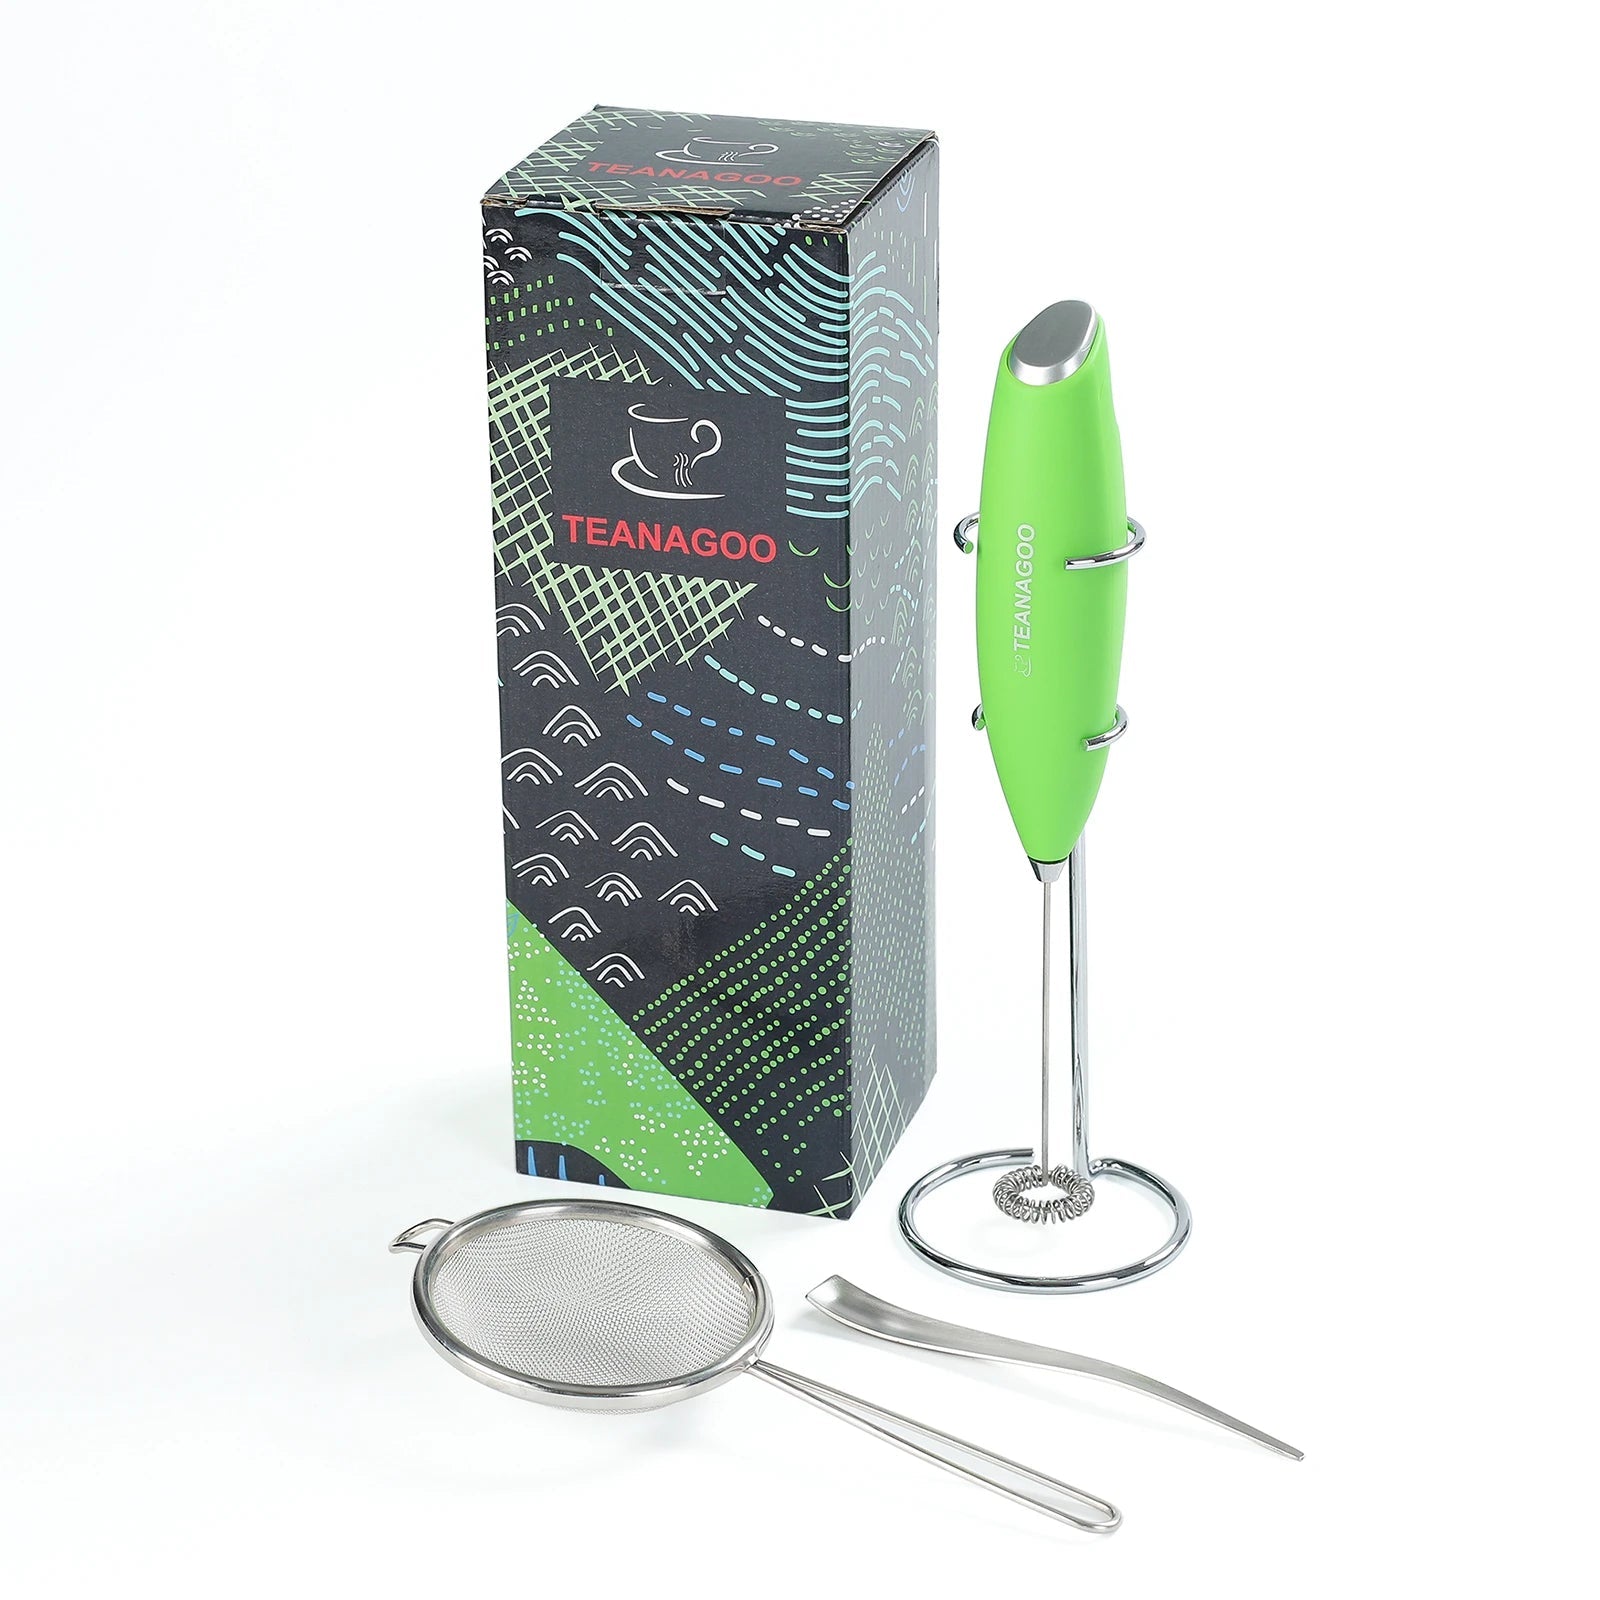 Jade Leaf Modern Matcha Starter Set - Electric Matcha Whisk Milk Frother, Stainless Steel Spoon, Stainless Steel Sifter, Printed Handbook